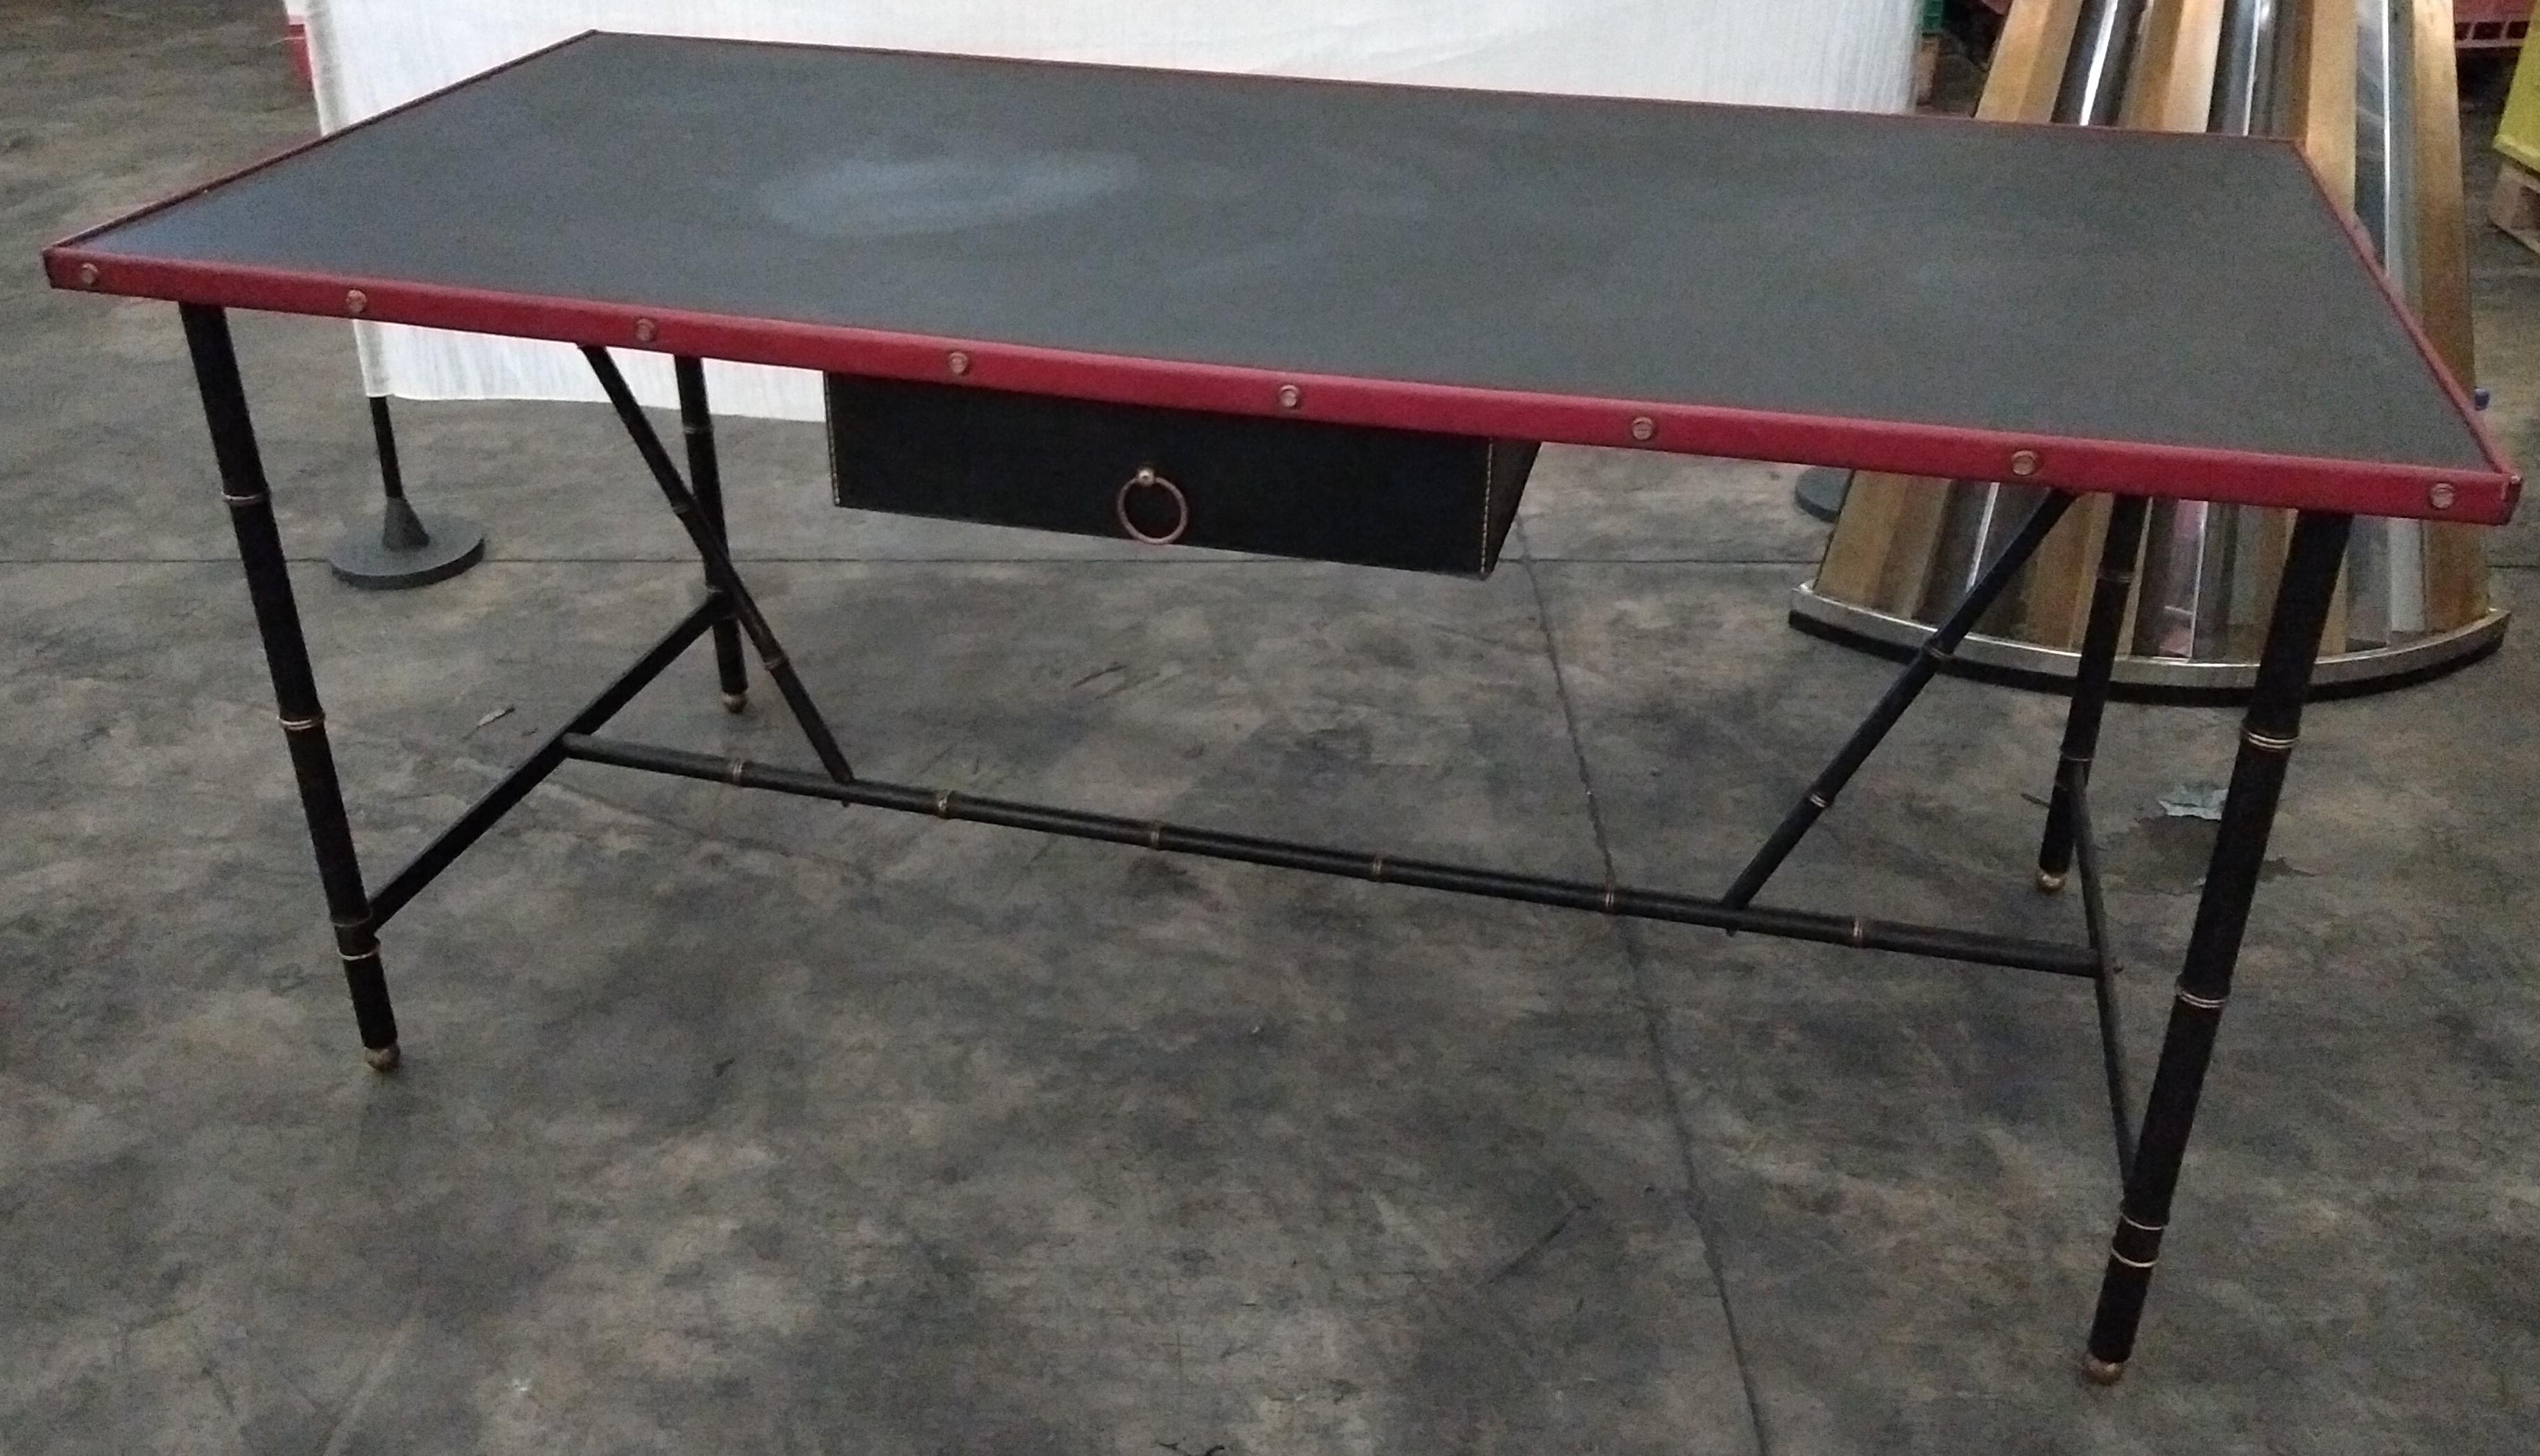 A large red and black desk designed by Jacques Adnet in France in 1950s.
A rectangular tray covered with black leather is framed by uprights wrapped in red leather and brass screws. The oak drawer is also leather wrapped and has a brass
ring